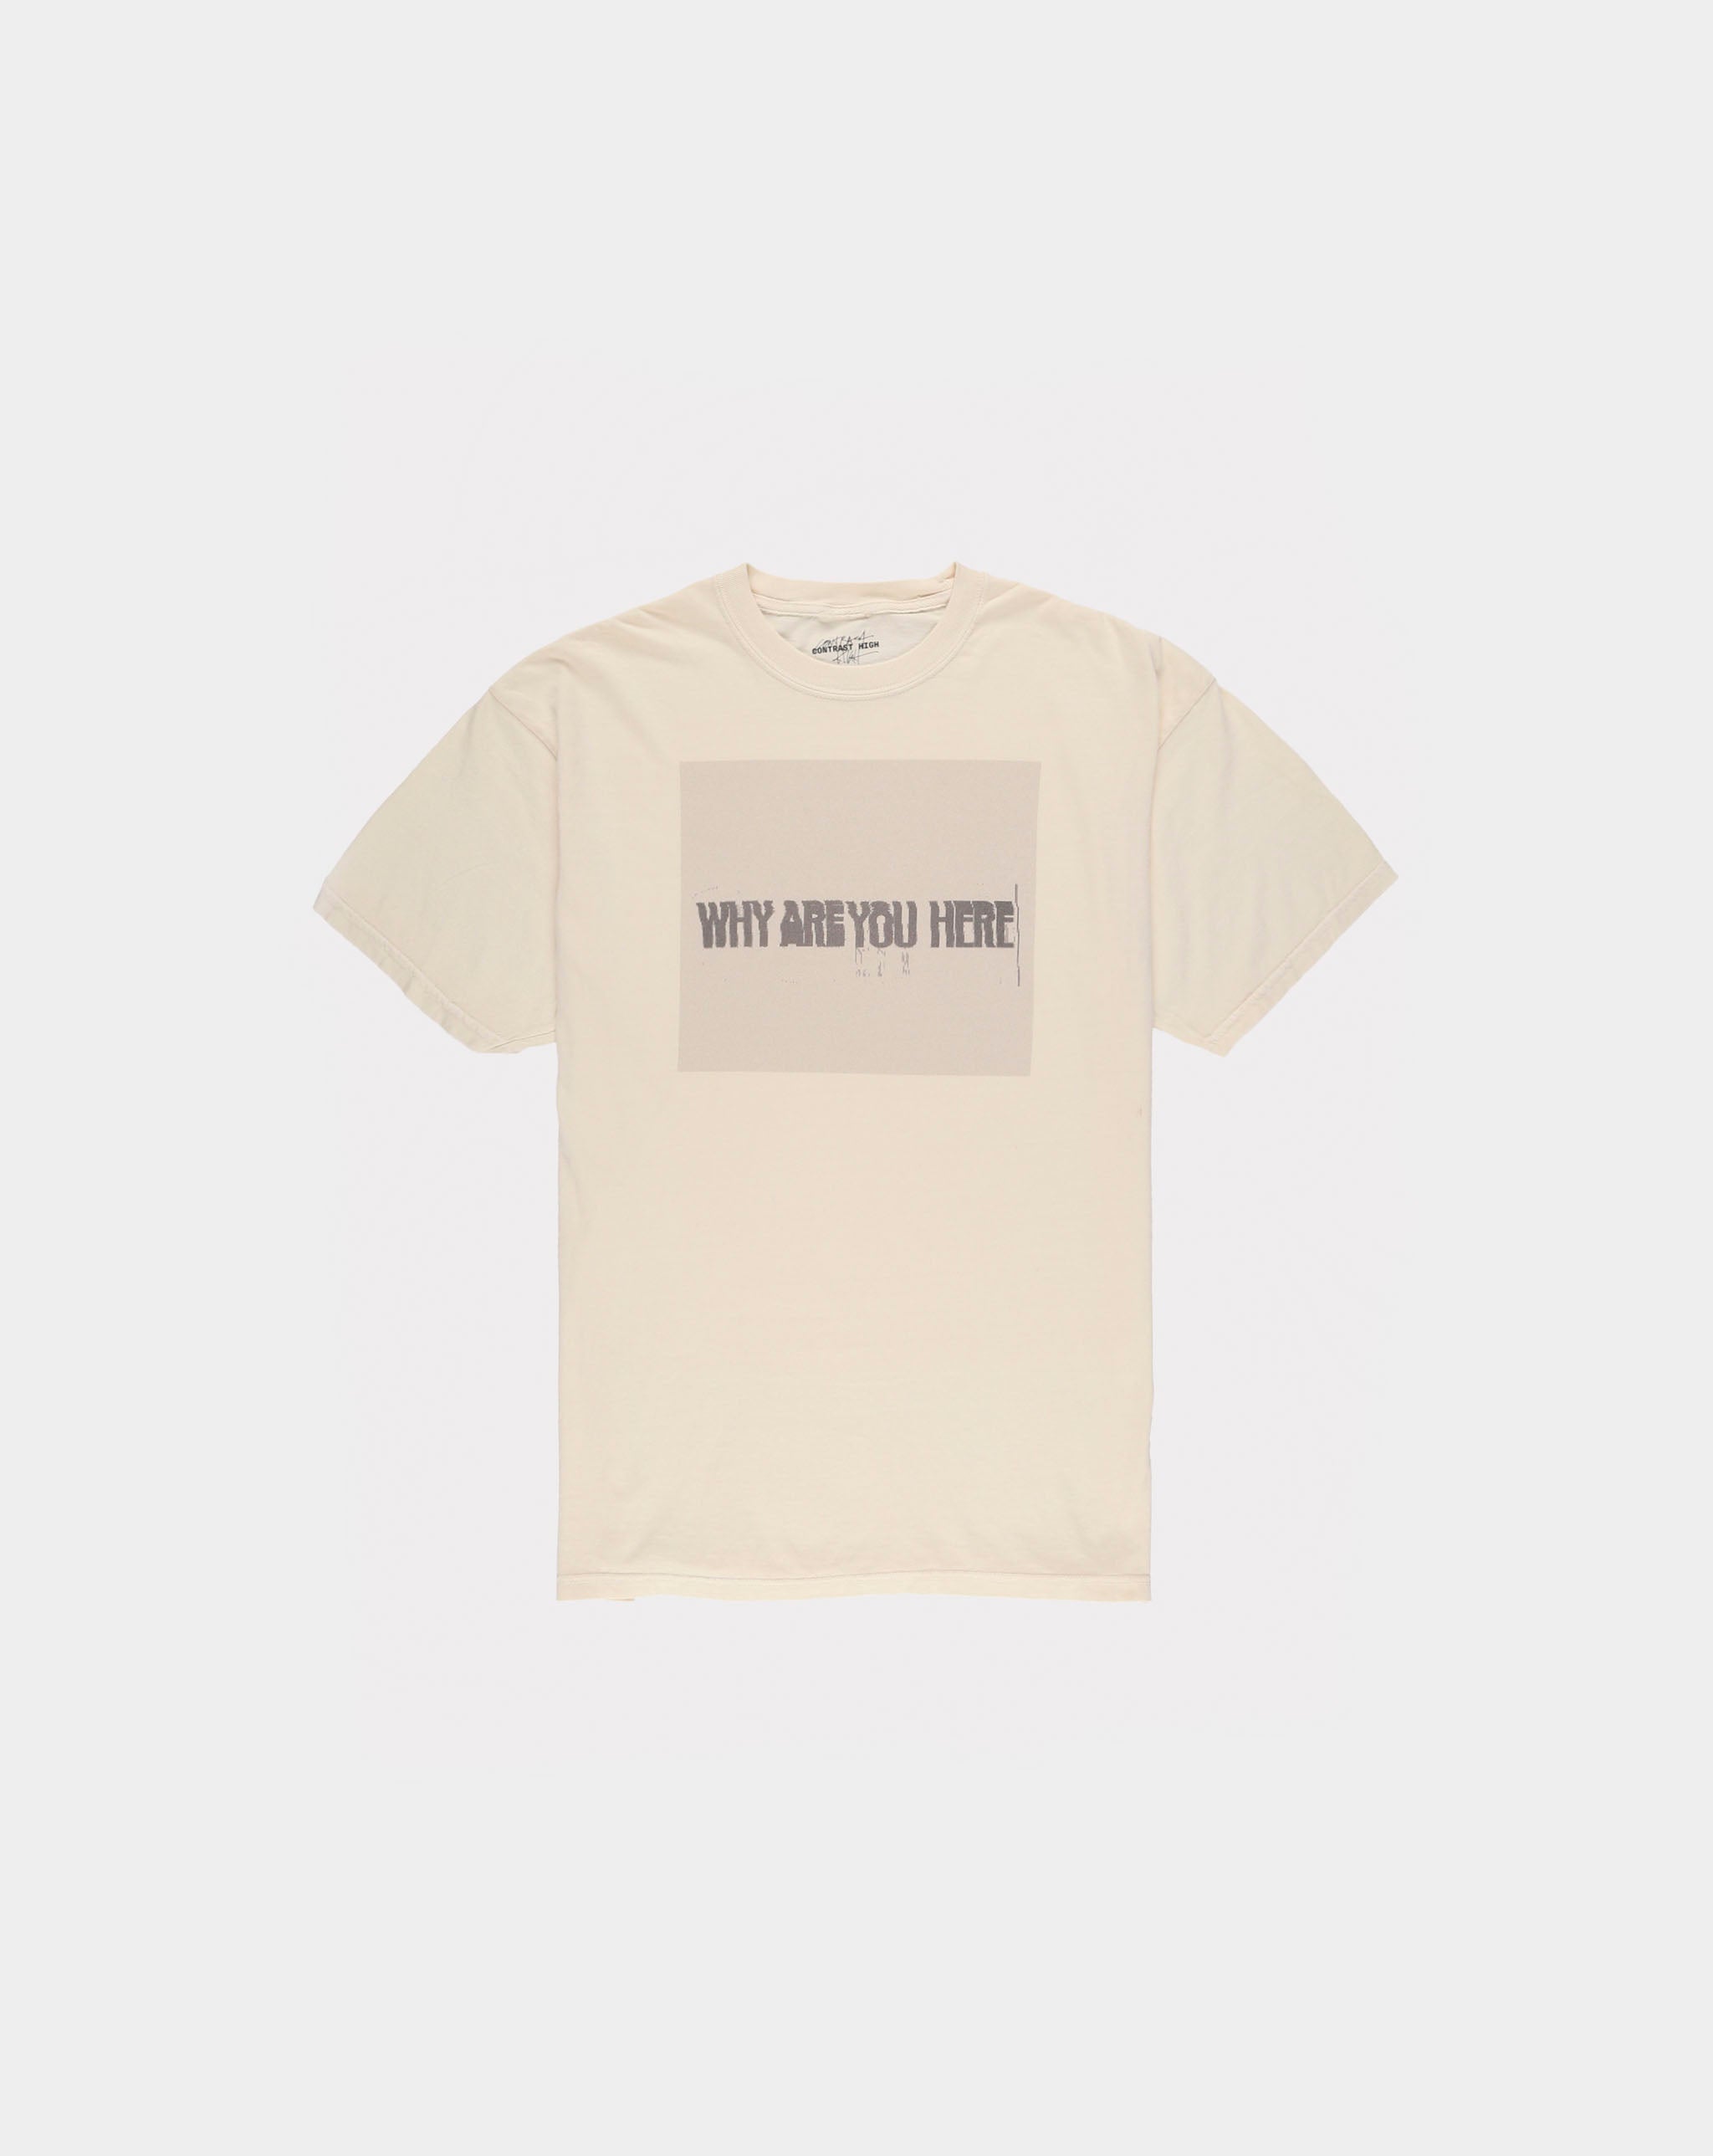 Contrast High CHxX Why Are You Here T-Shirt  - XHIBITION